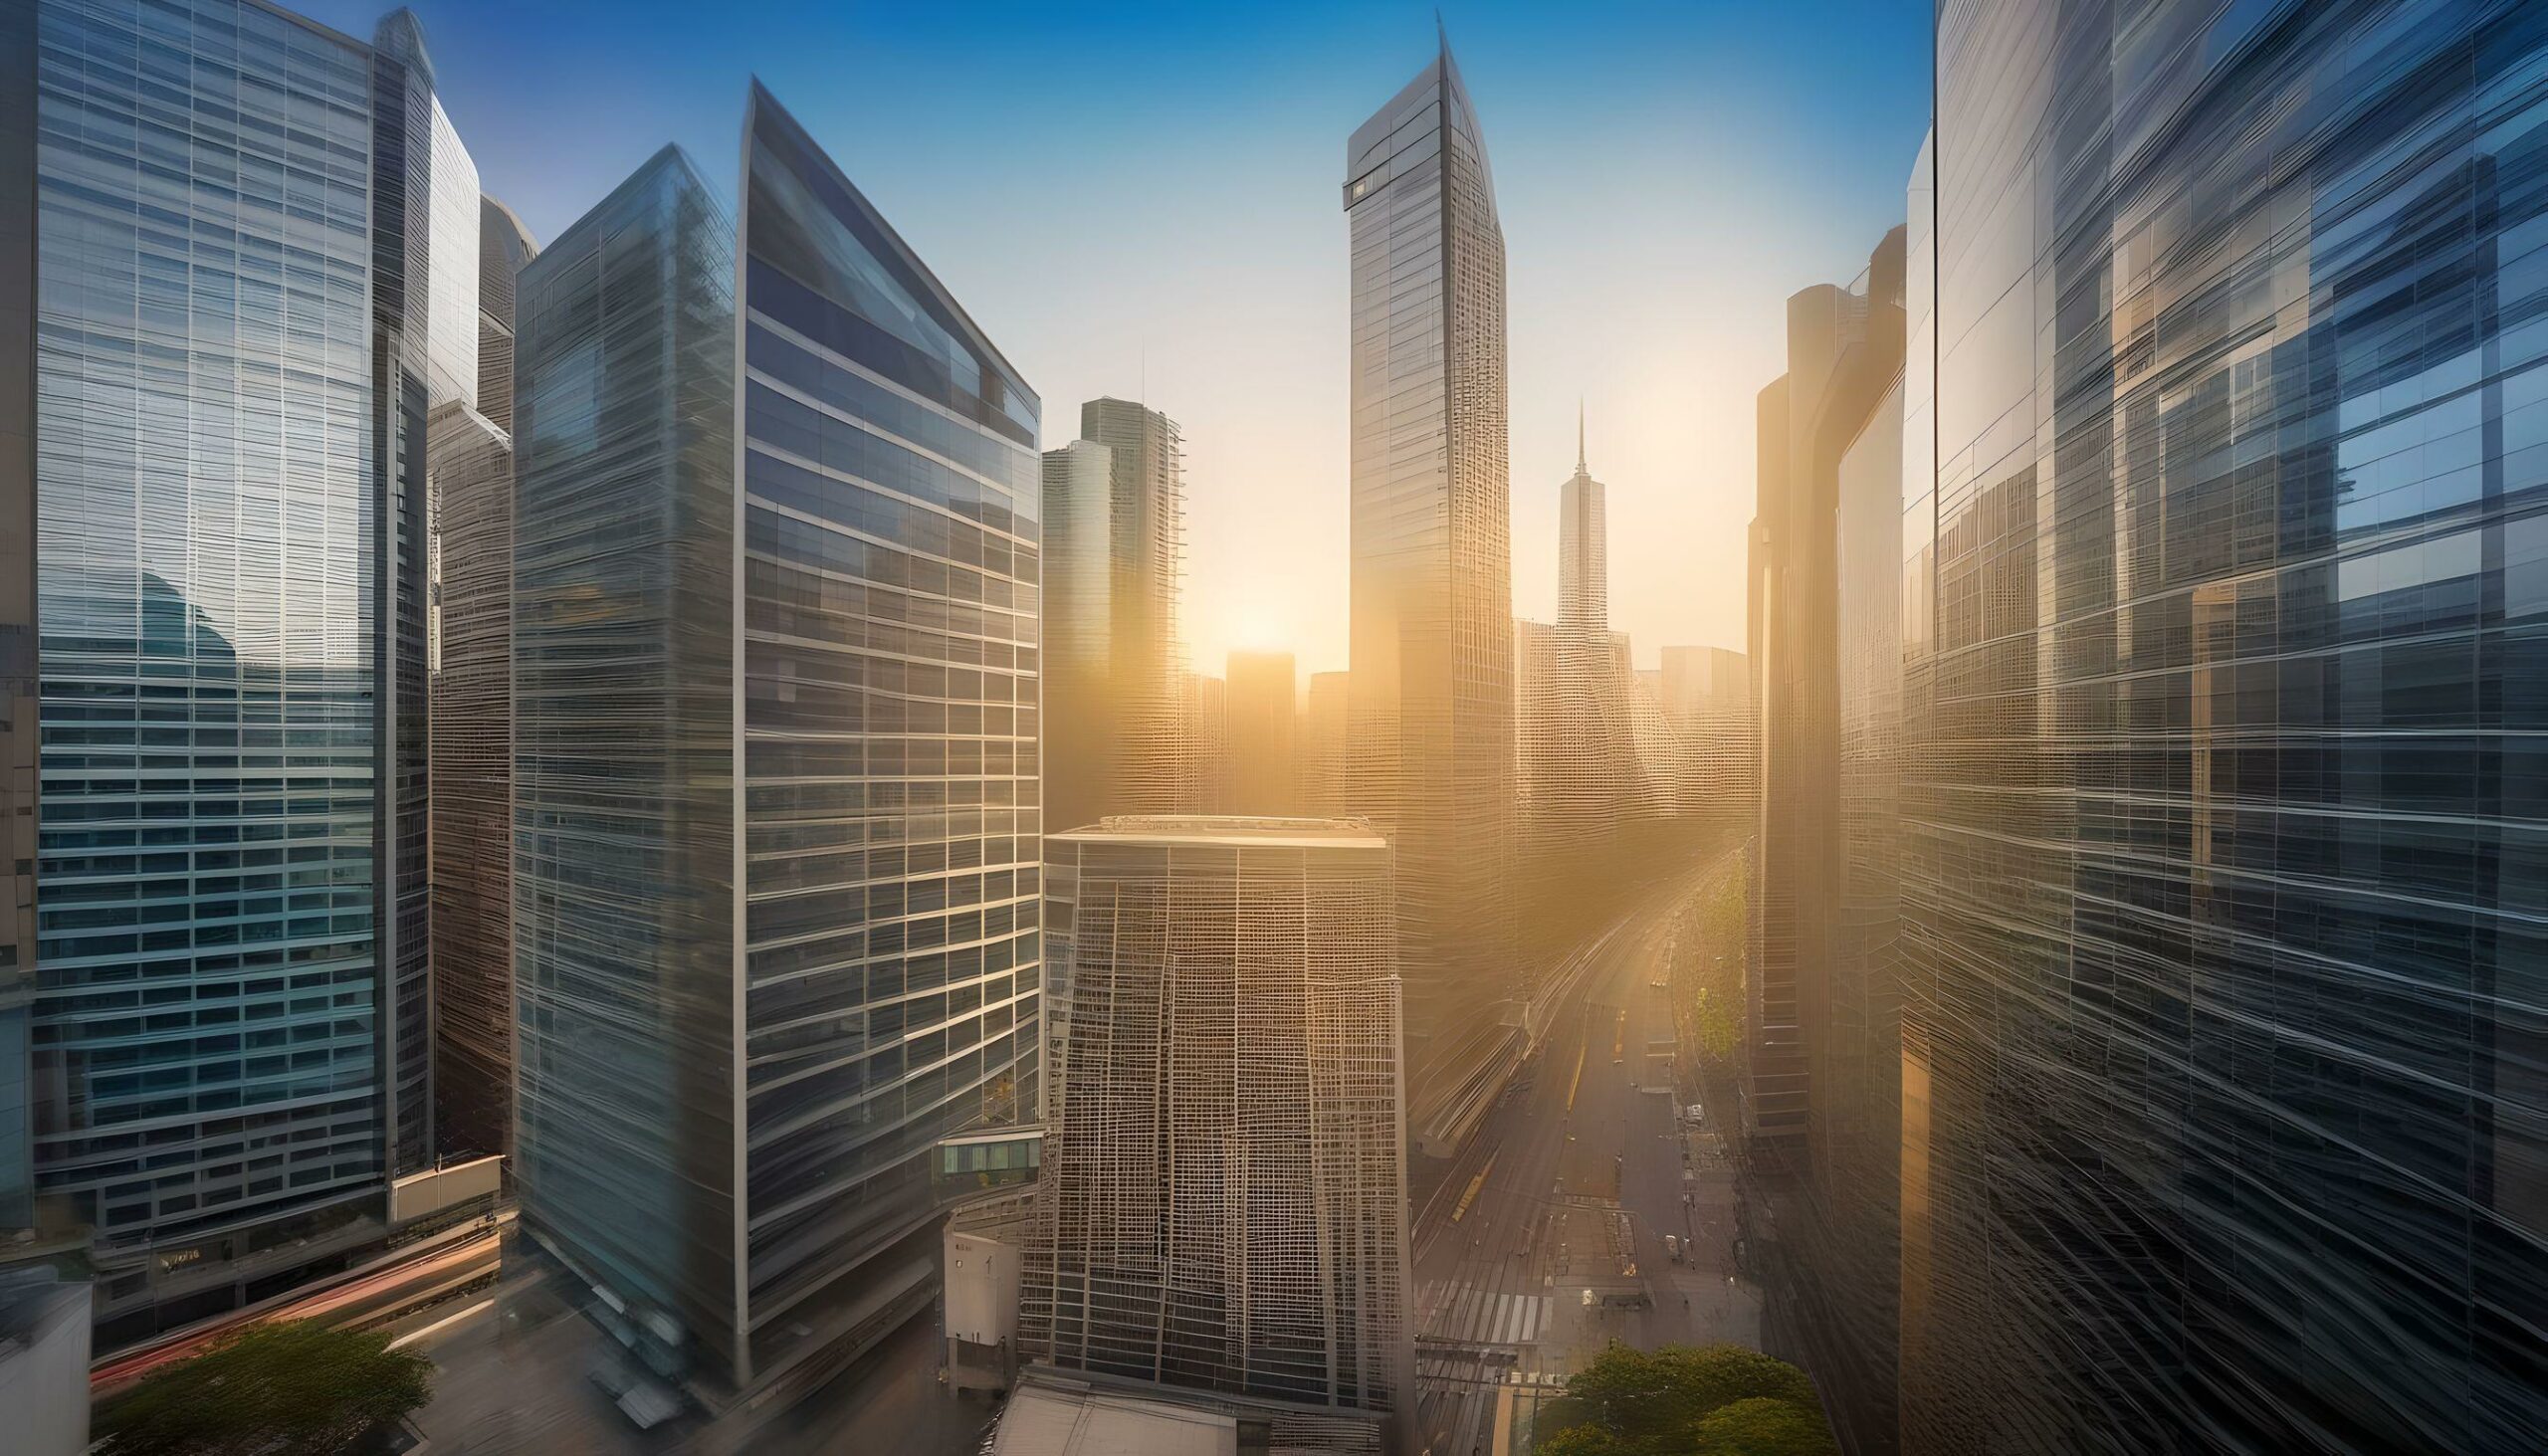 Sunset over a modern cityscape with towering skyscrapers and reflective glass facades.